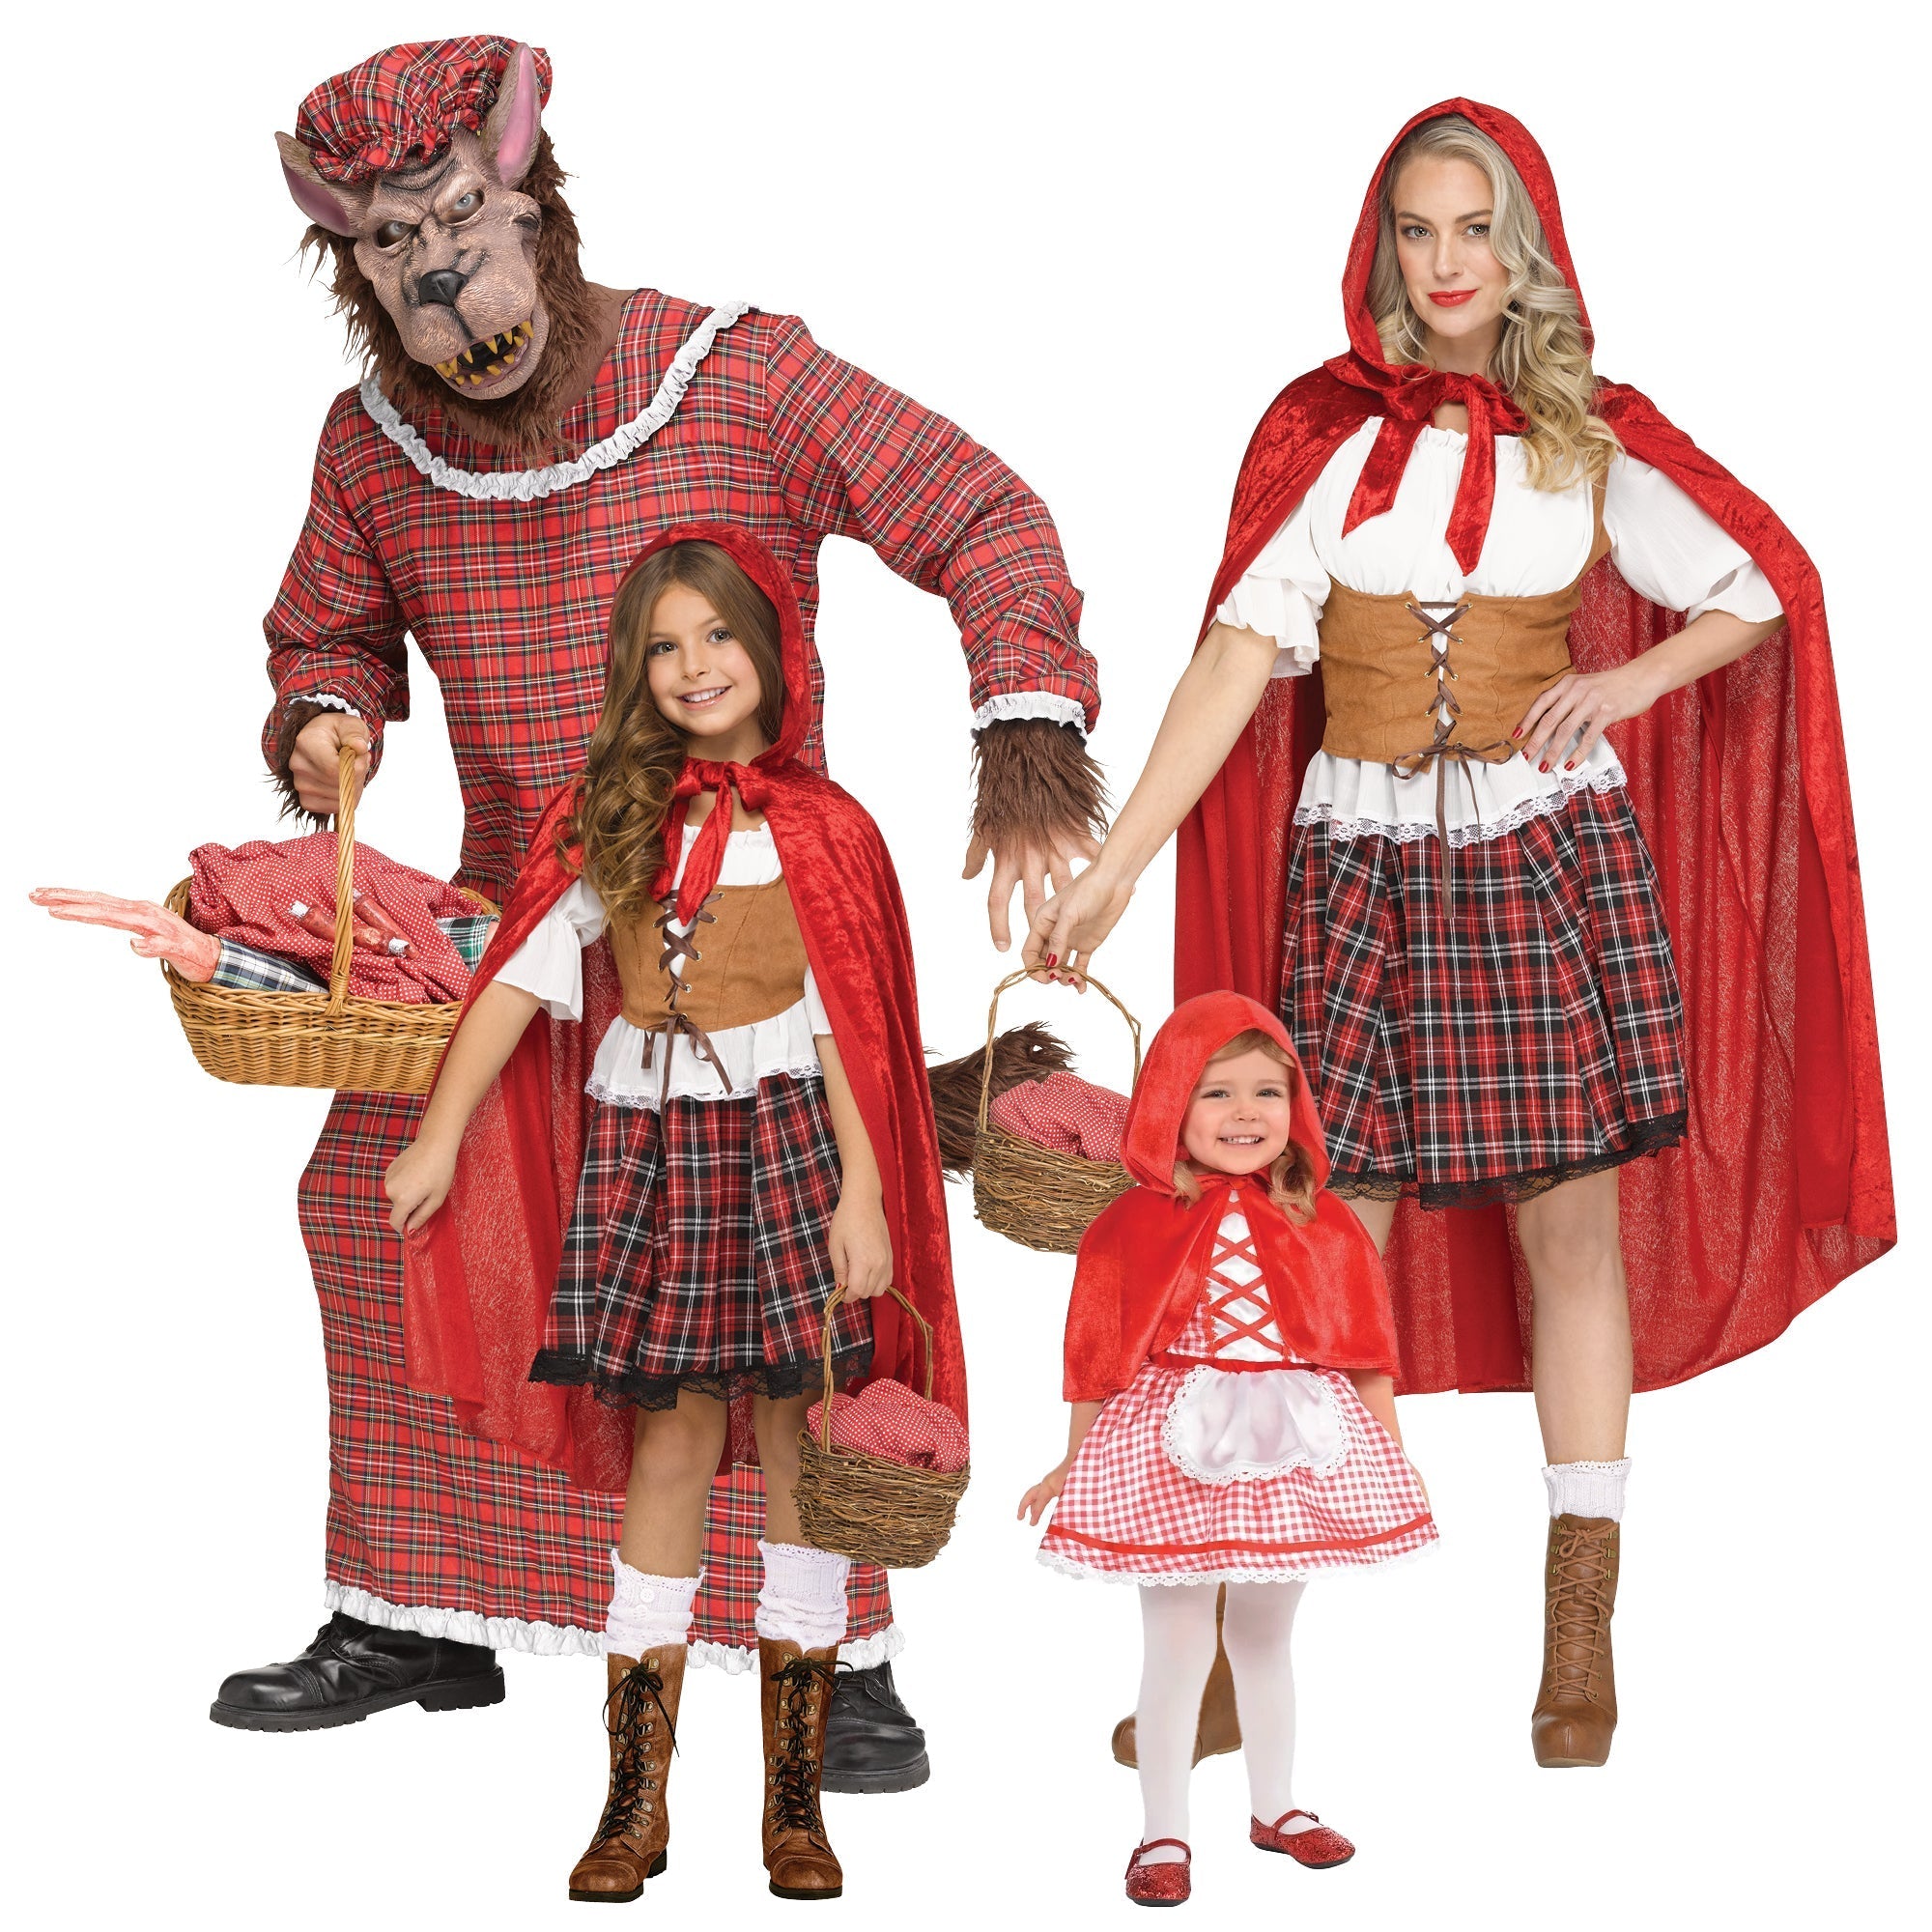 Red Riding Hood Family Costumes